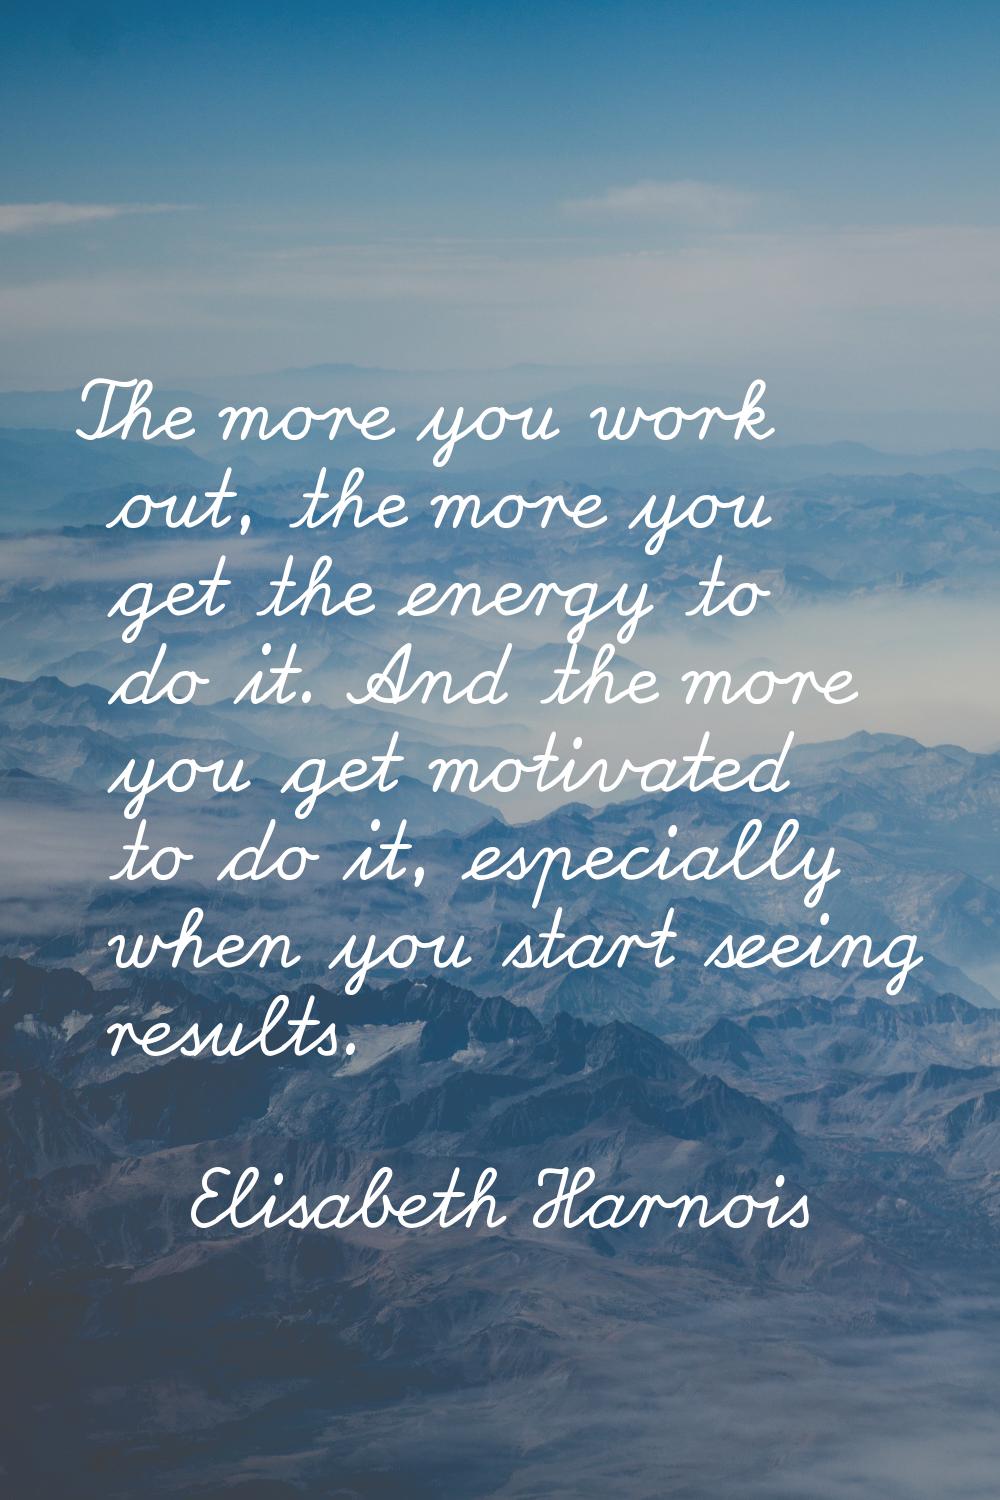 The more you work out, the more you get the energy to do it. And the more you get motivated to do i